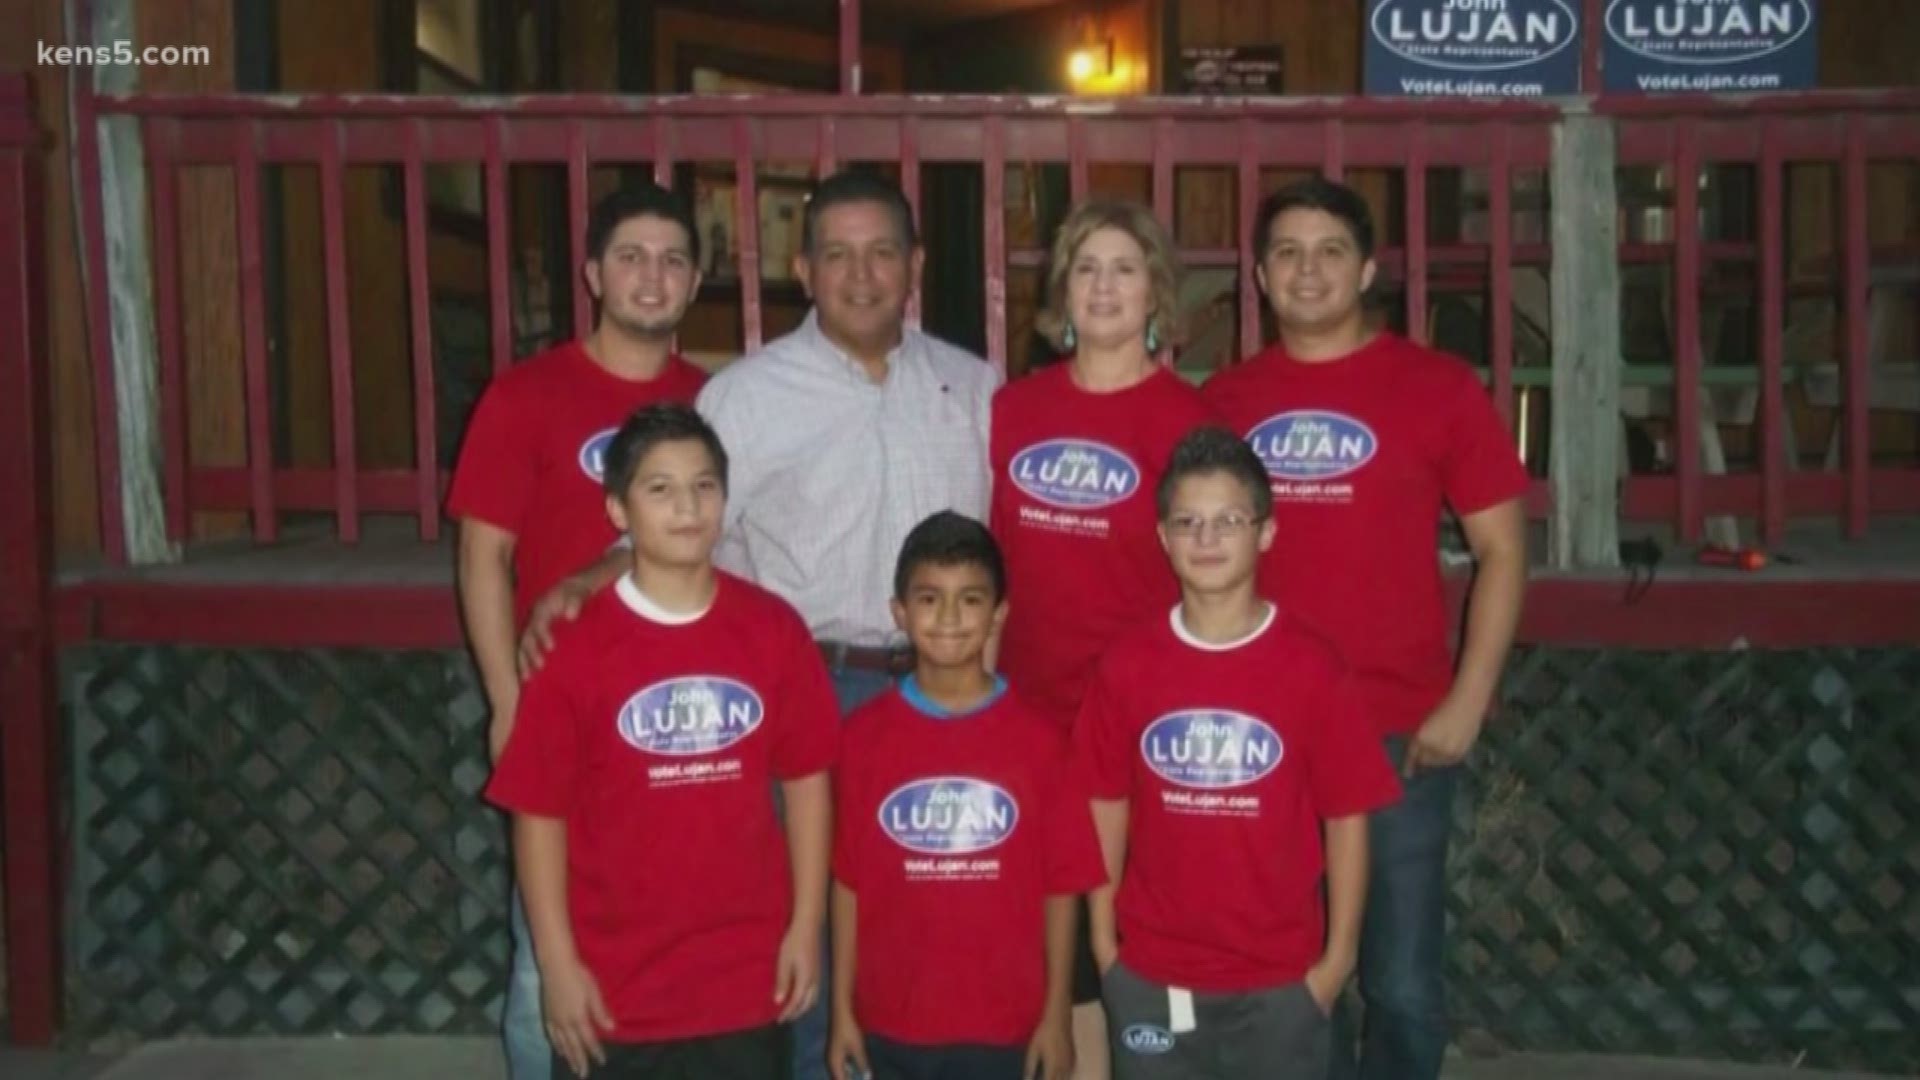 The Lujan family had already raised two children but their faith called them to raise three more, saving the lives of the boys they adopted.